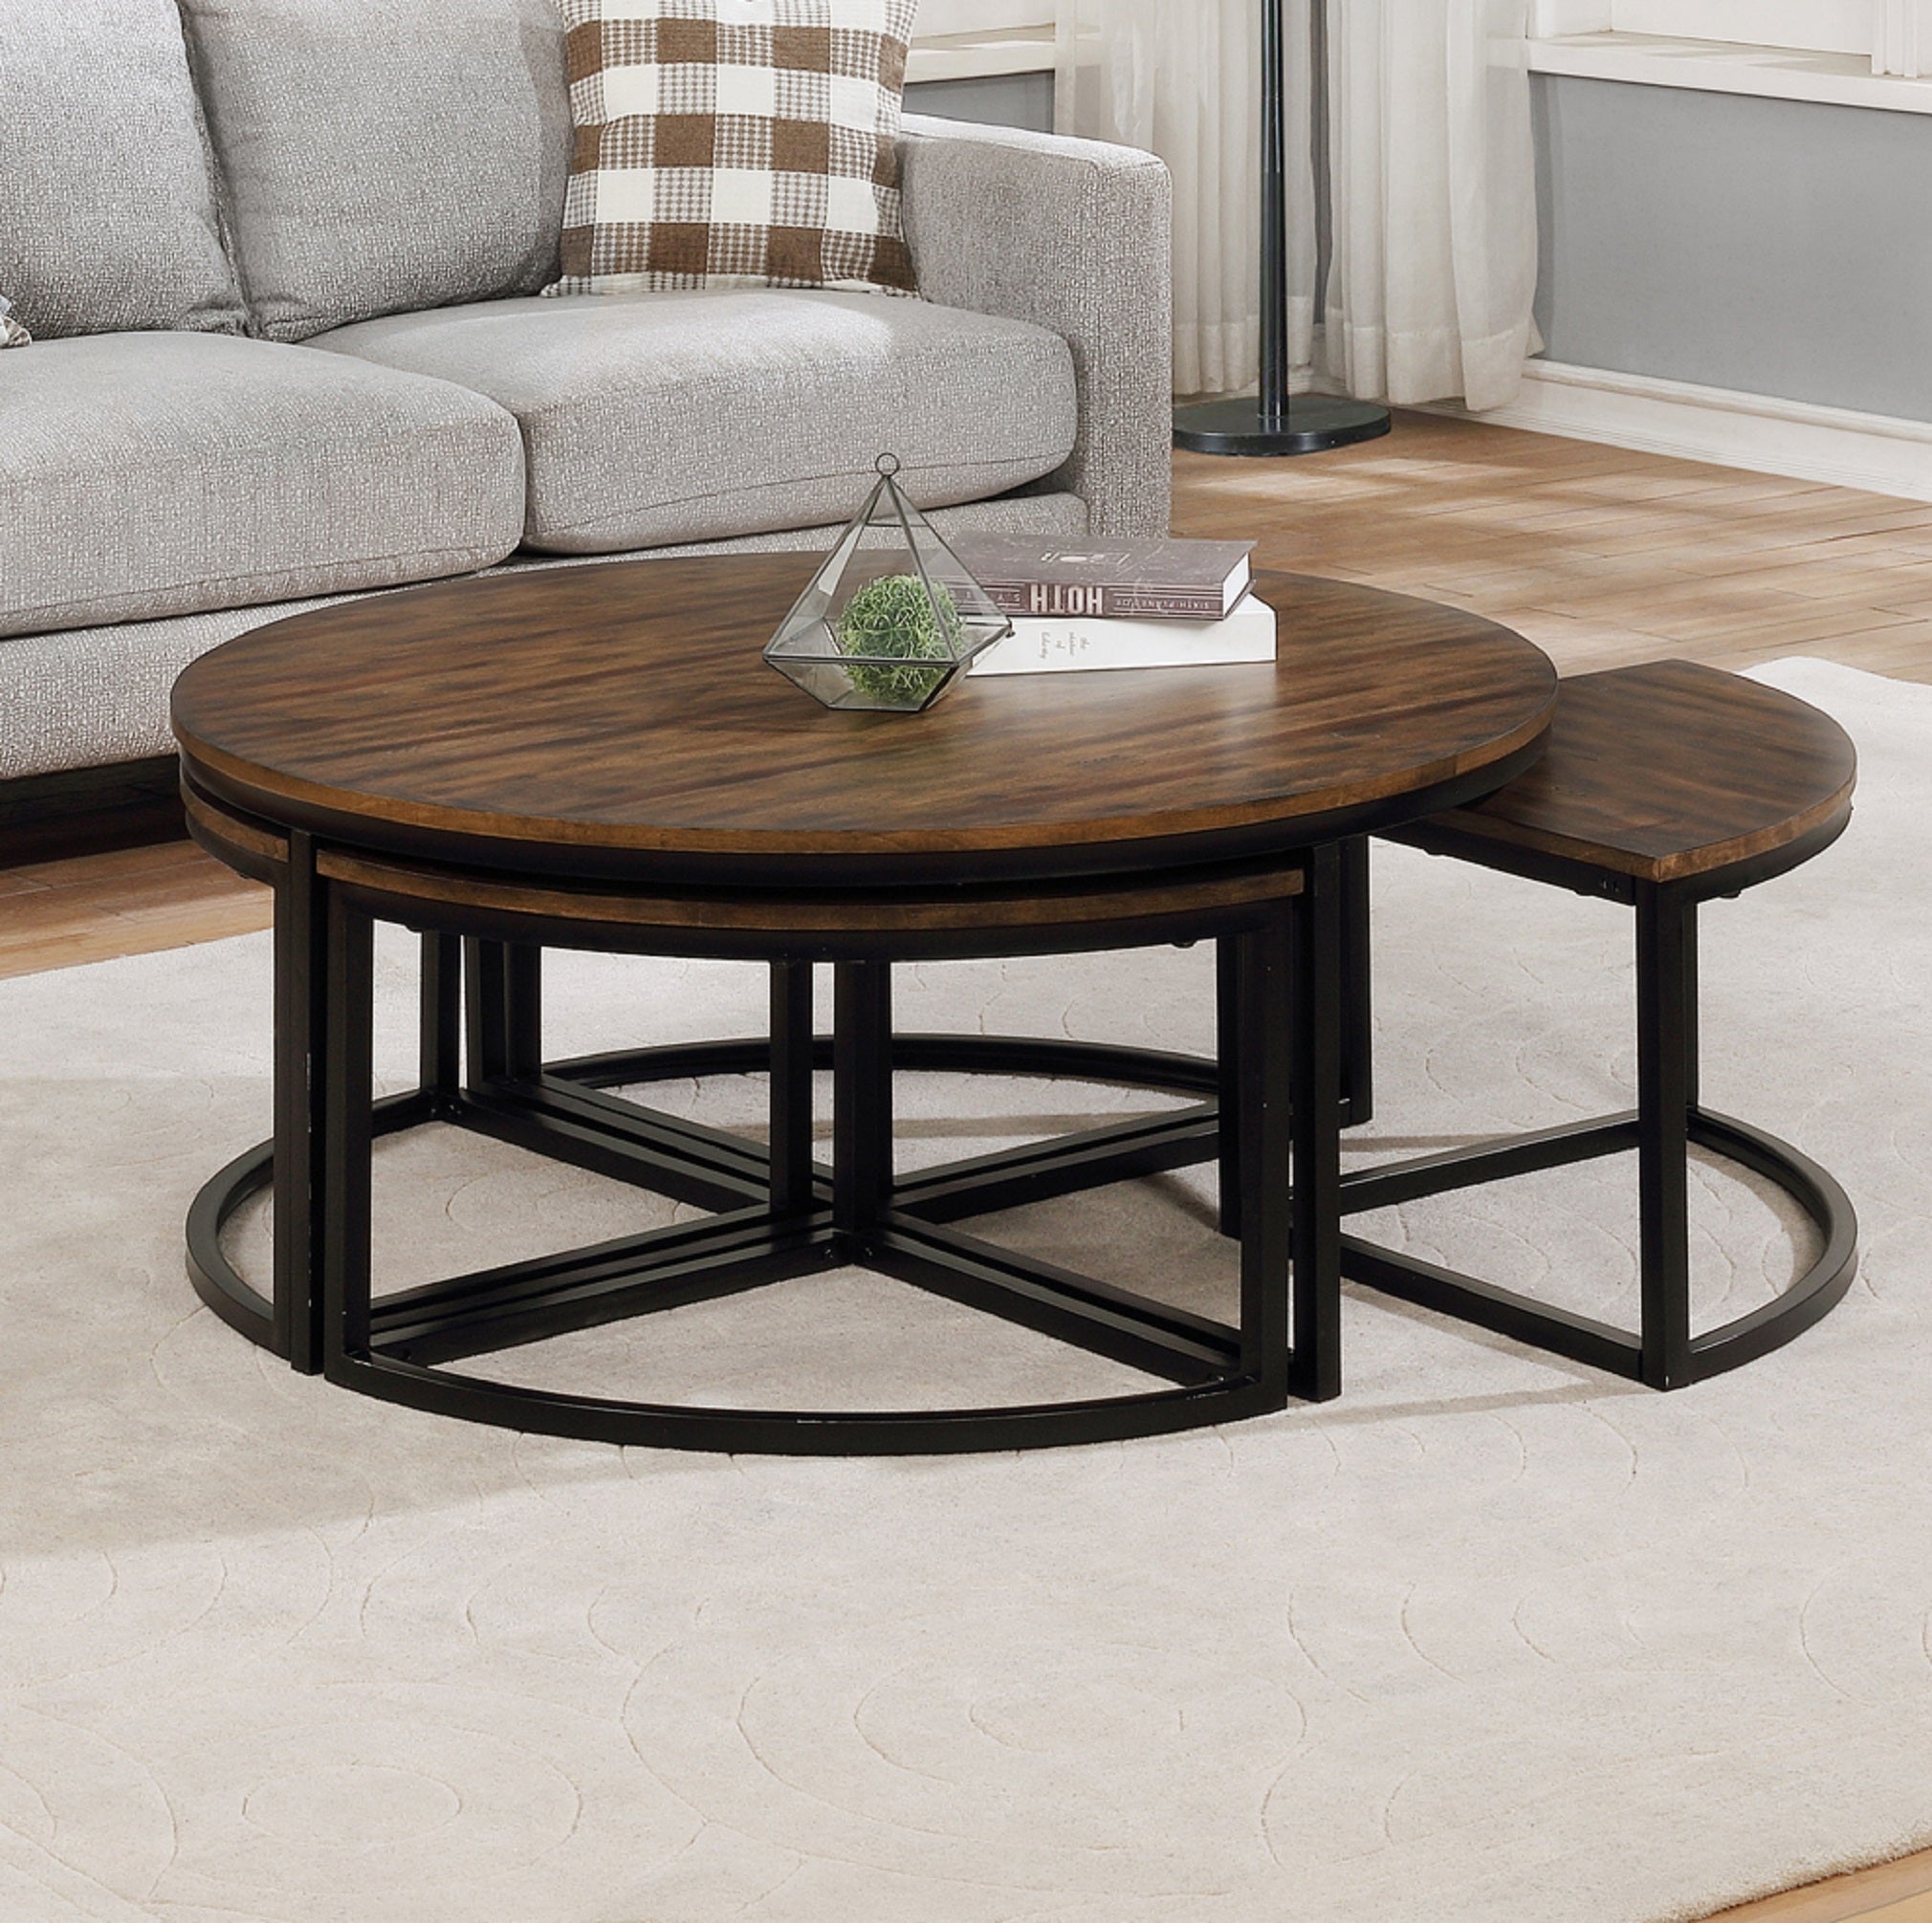 Arcadia Acacia Wood 42" Round Coffee Table with Nesting Tables, Antiqued Mocha - Pier 1